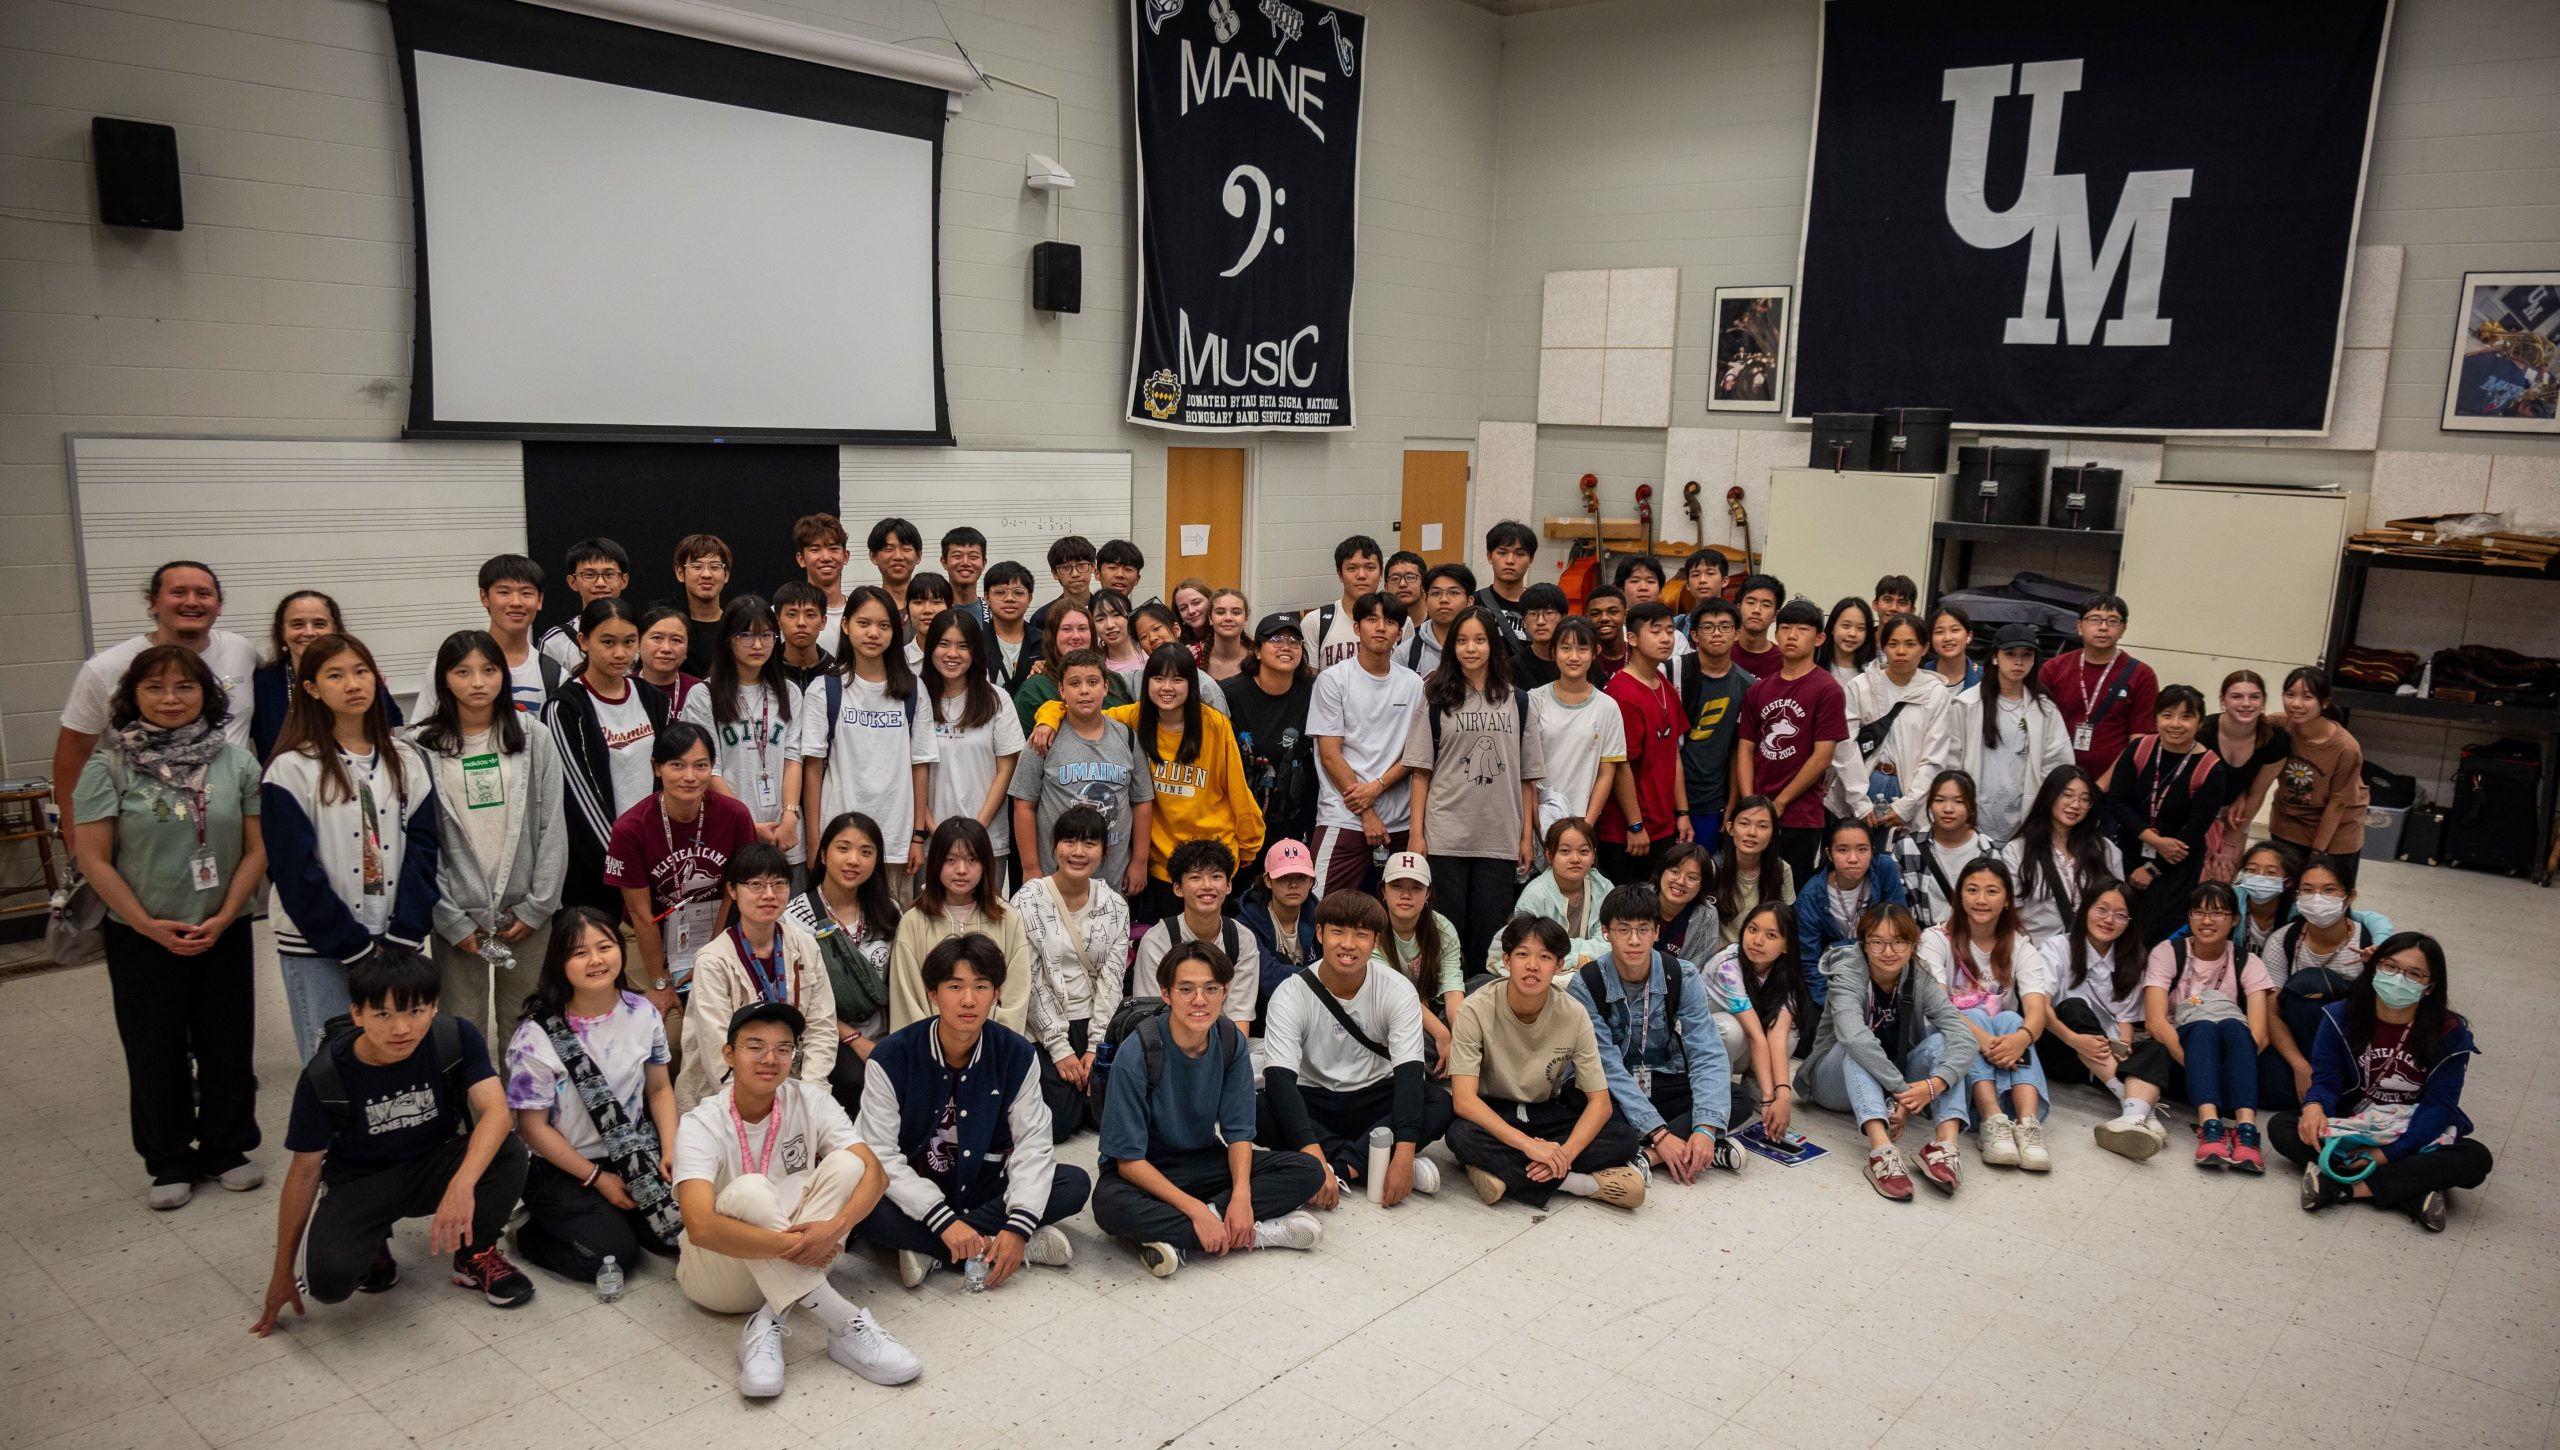 Maine Central Institute and Taiwan Student Visit to Campus